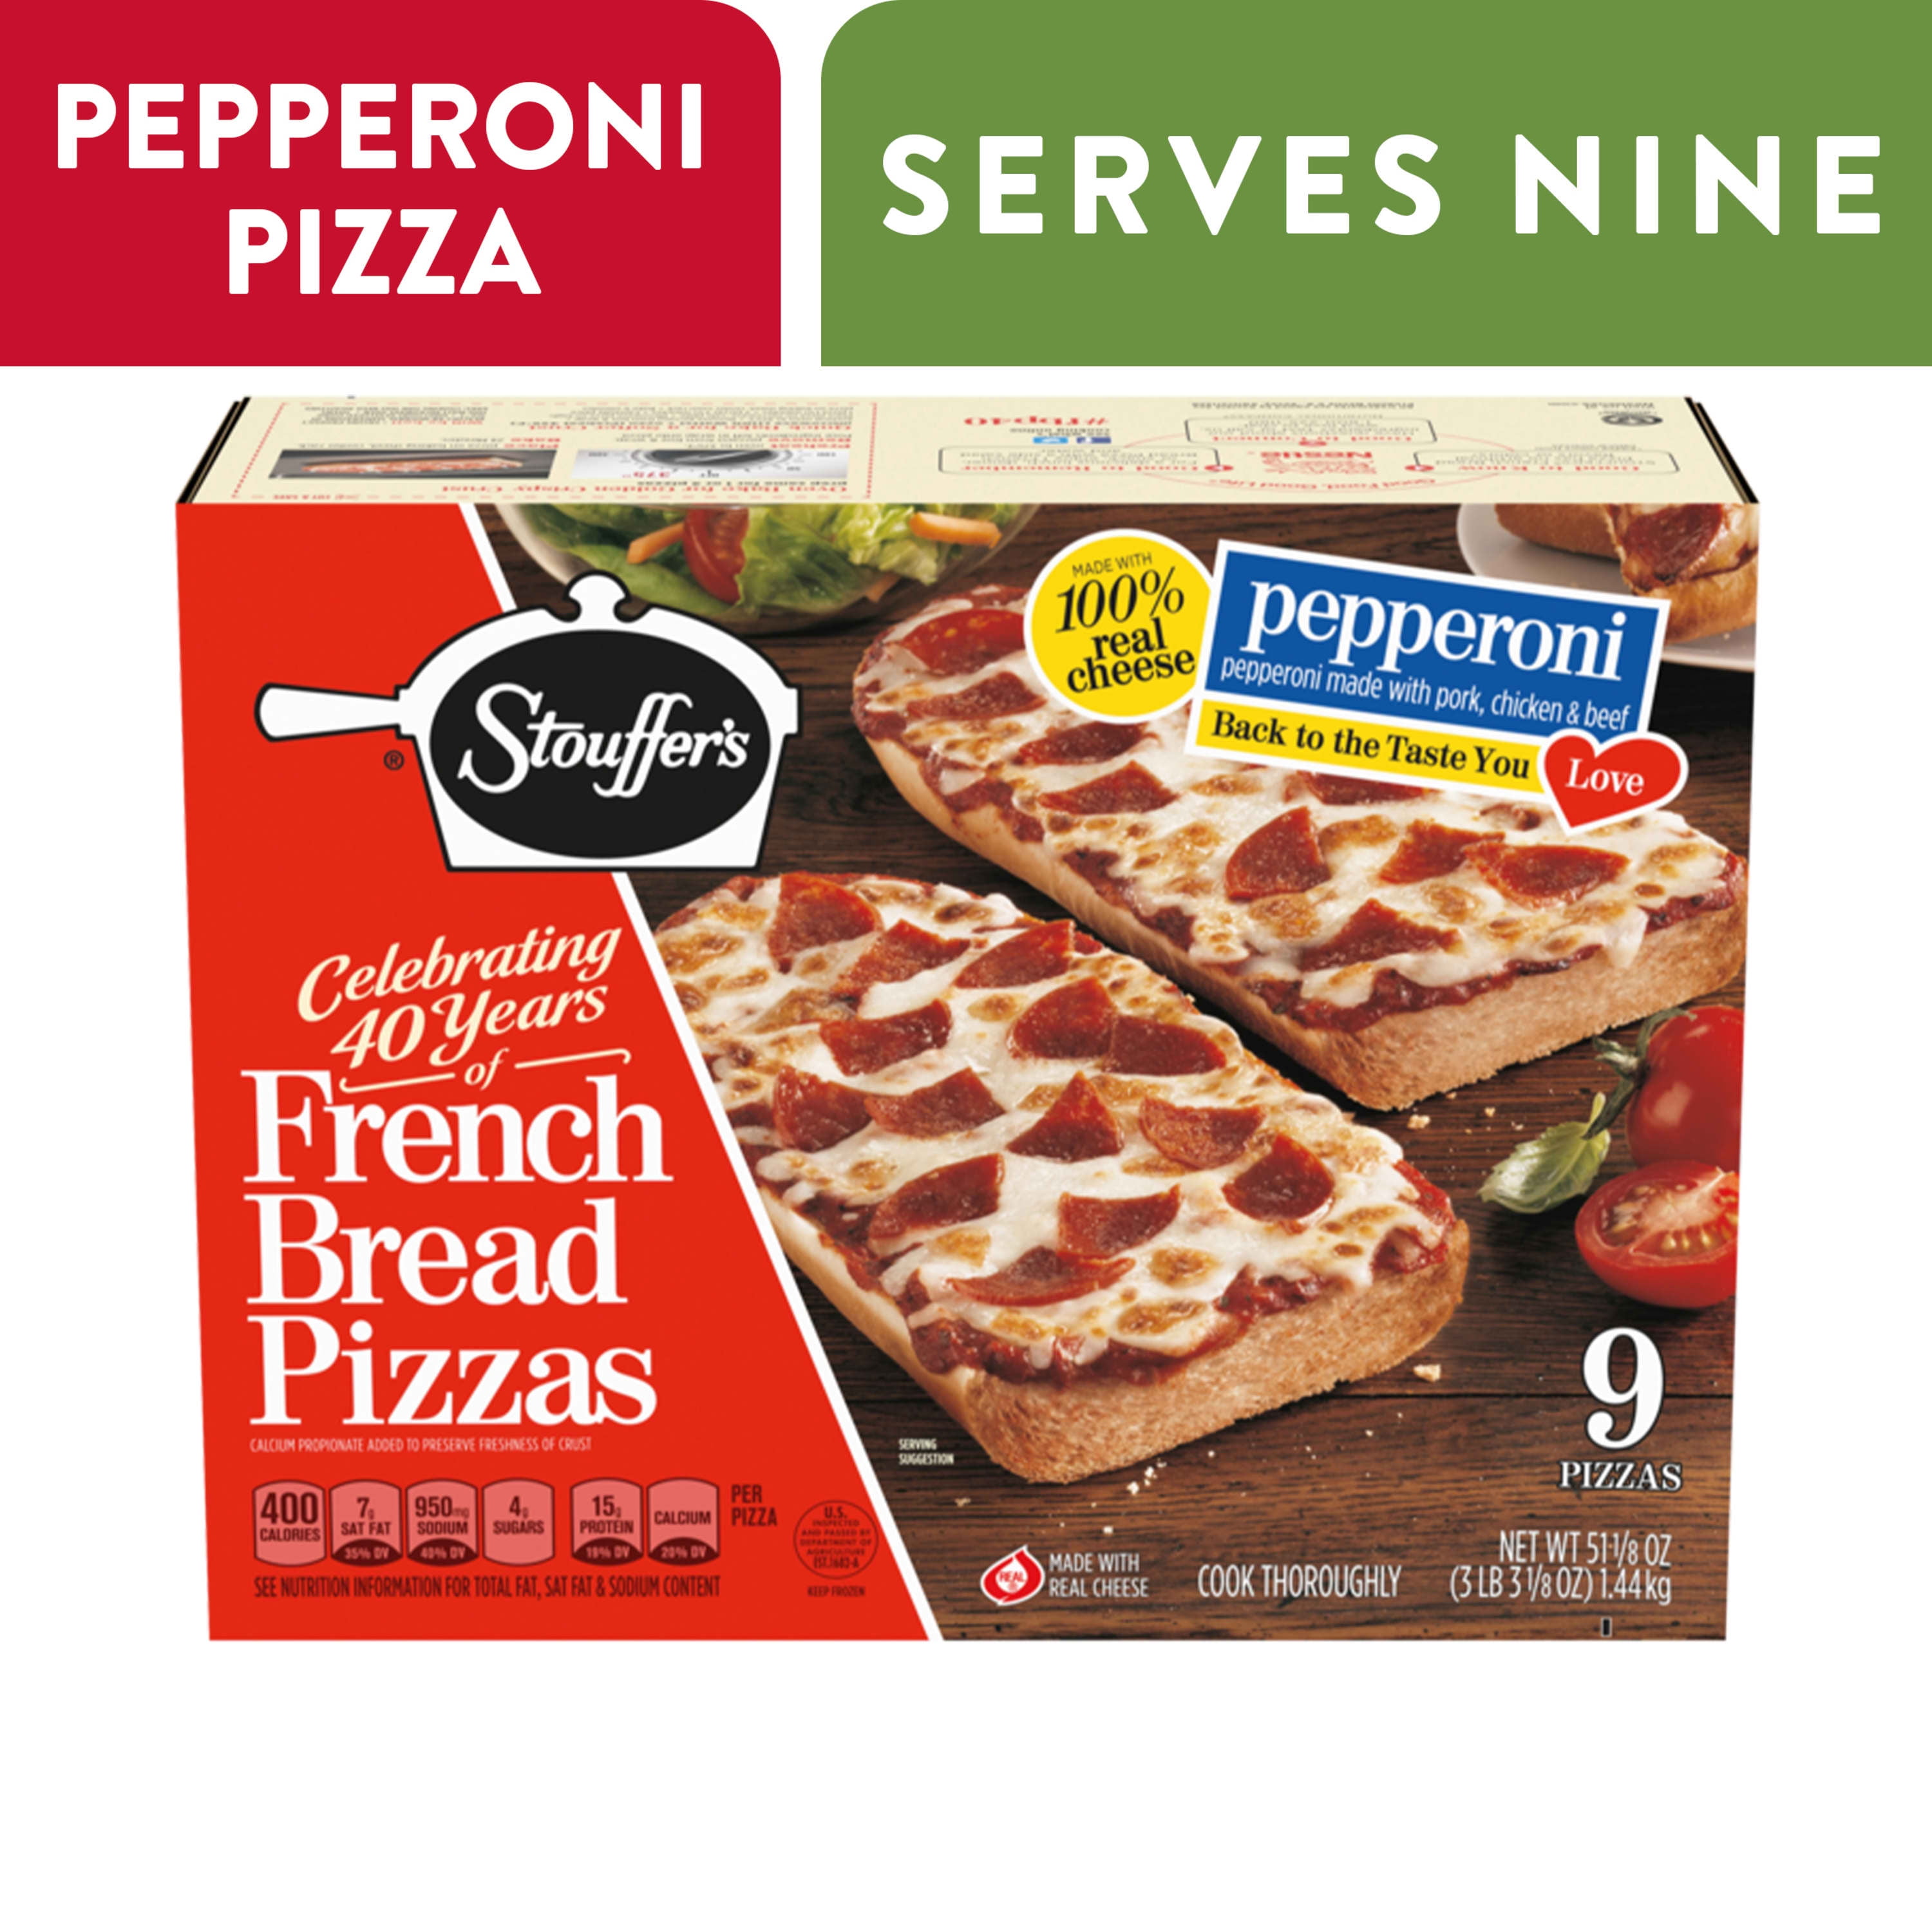 Stouffer's French Bread Pizza: Convenience Meets Comfort